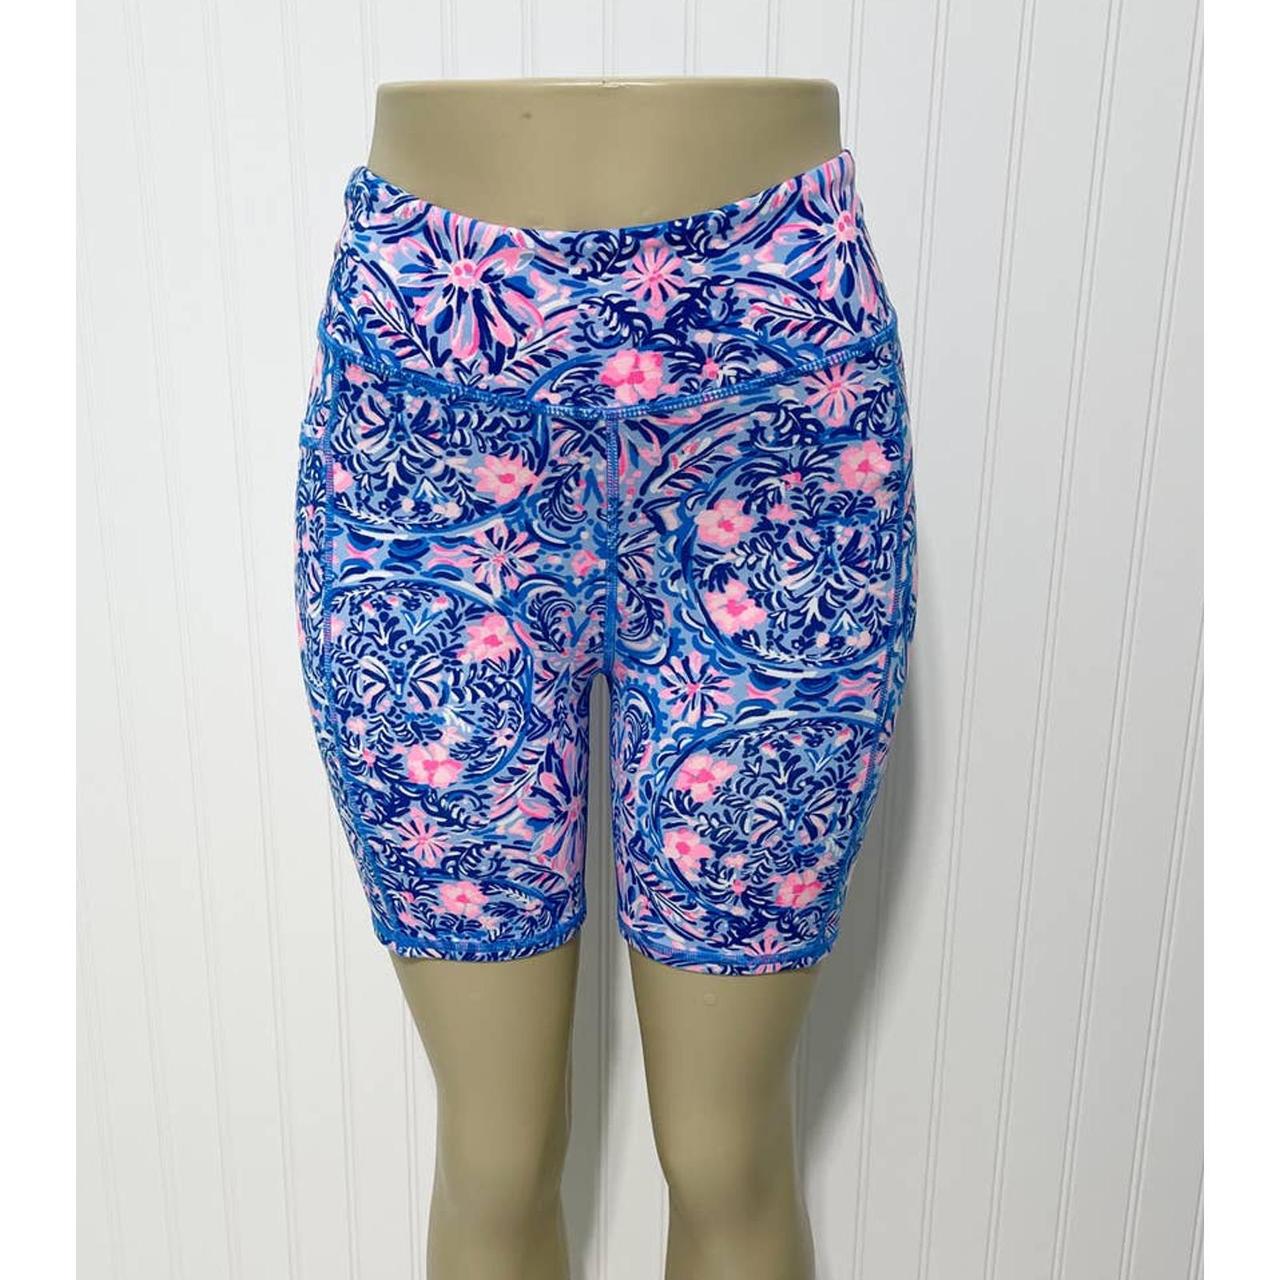 Lilly Pulitzer Women's Blue and Pink Shorts